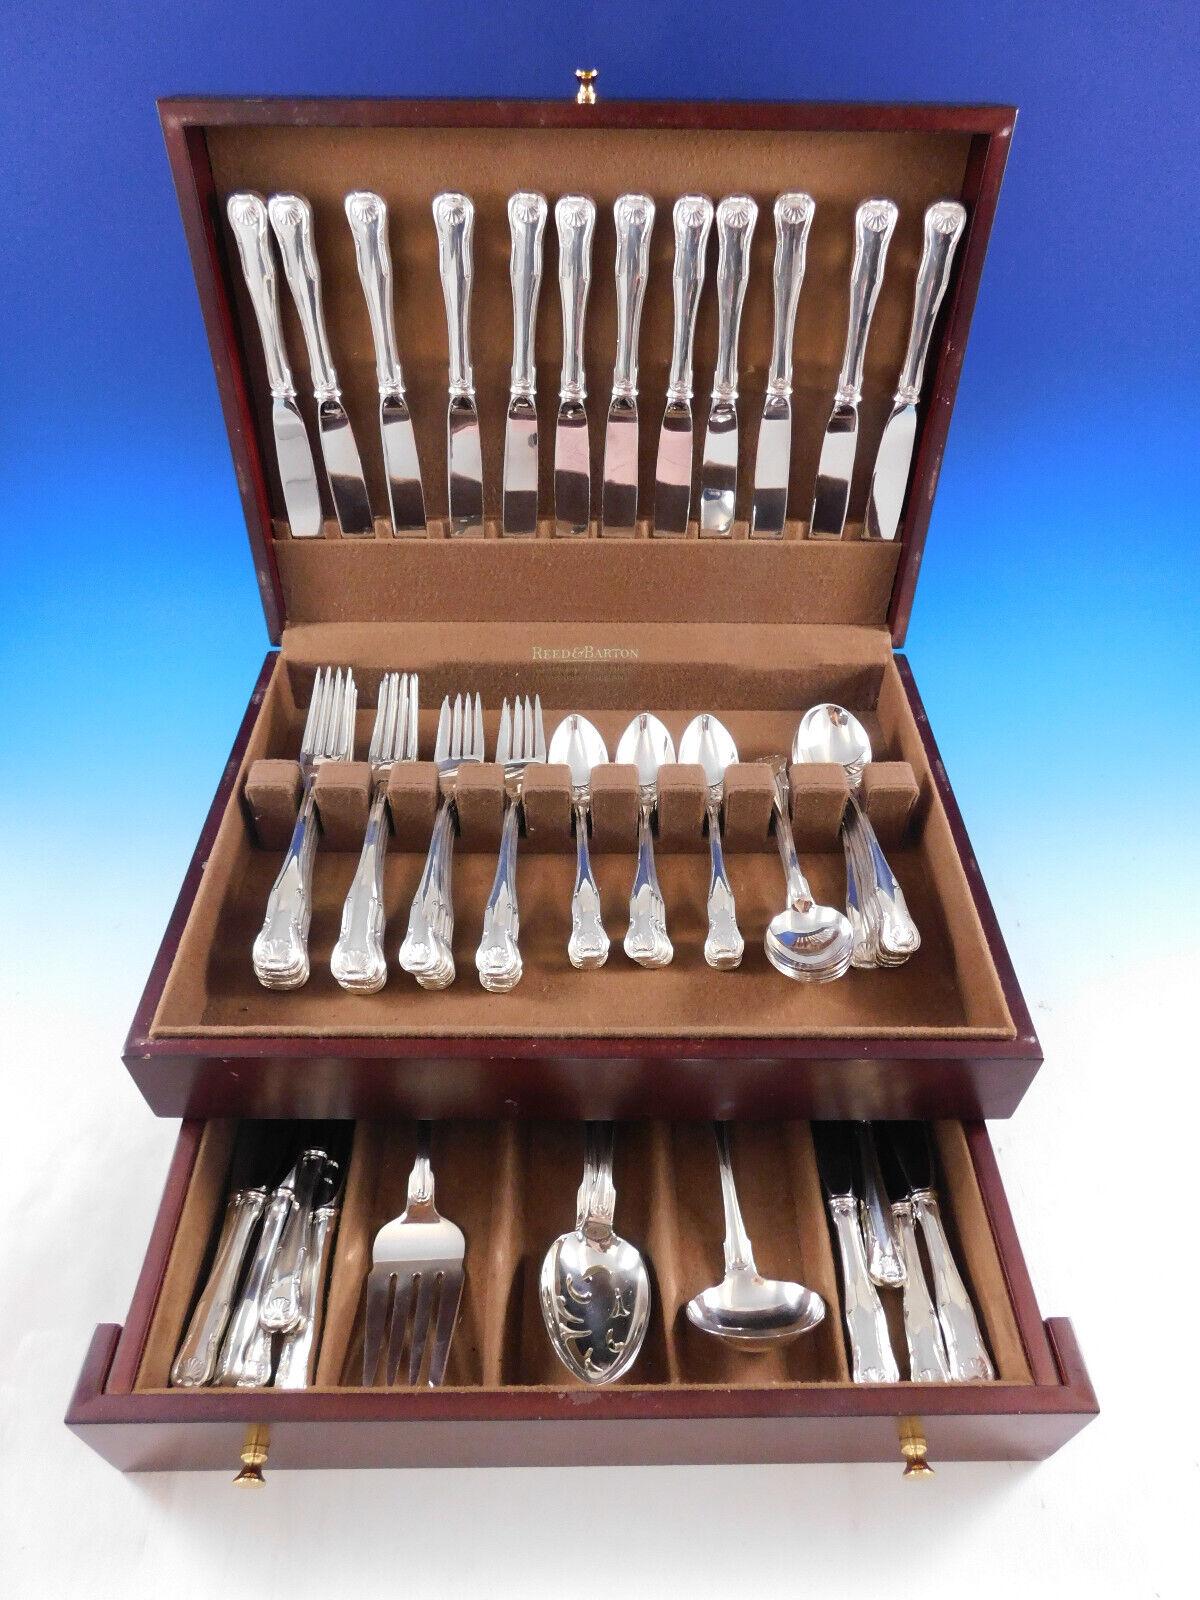 King by Kirk-Stieff Sterling Silver Flatware set - 76 pieces. Kirk-Stieff's version of the traditional Kings-style places its emphasis on simplicity of design, and features an iconic shell motif. This set includes:

12 Knives w/ modern blades, 8